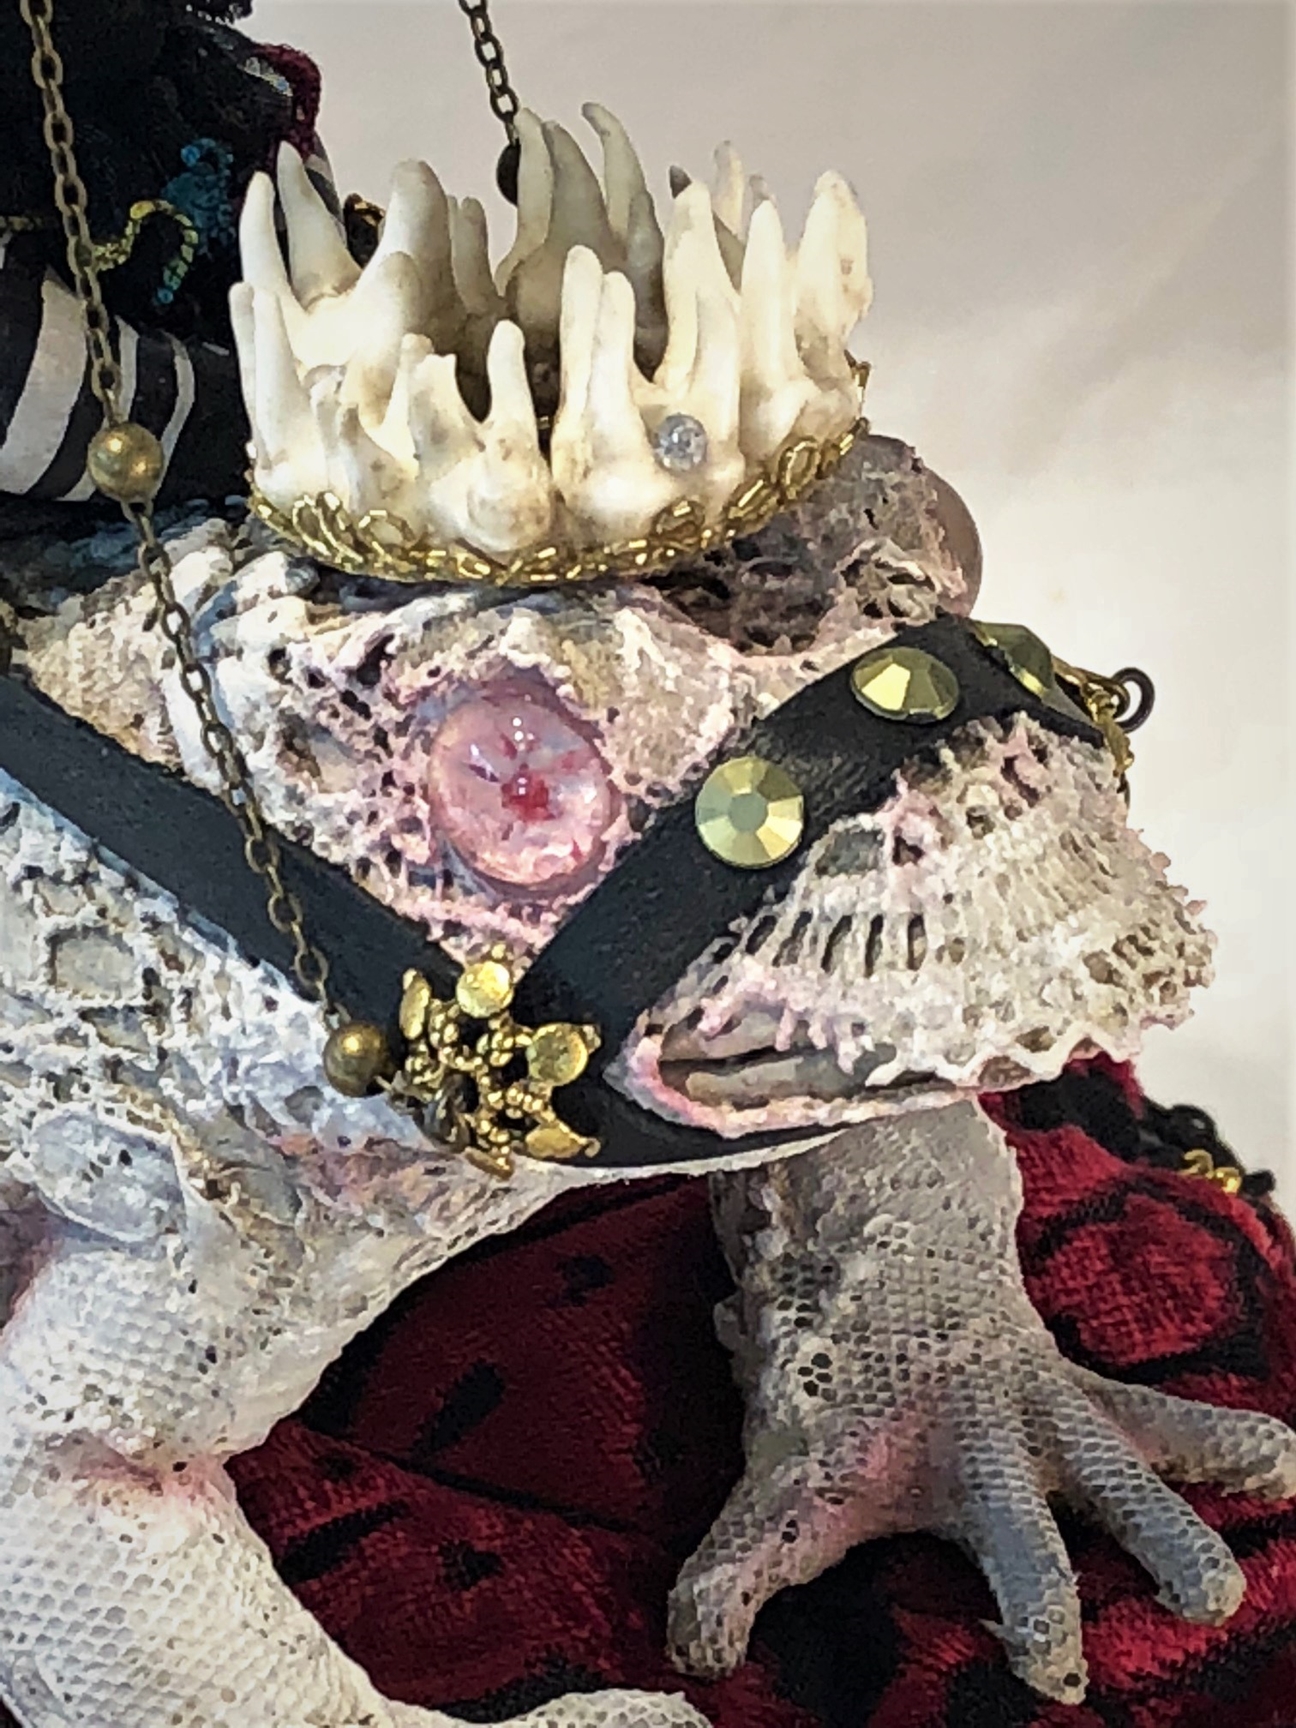 close-up detail lace covered frog toy with crown made of teeth wearing a bridle